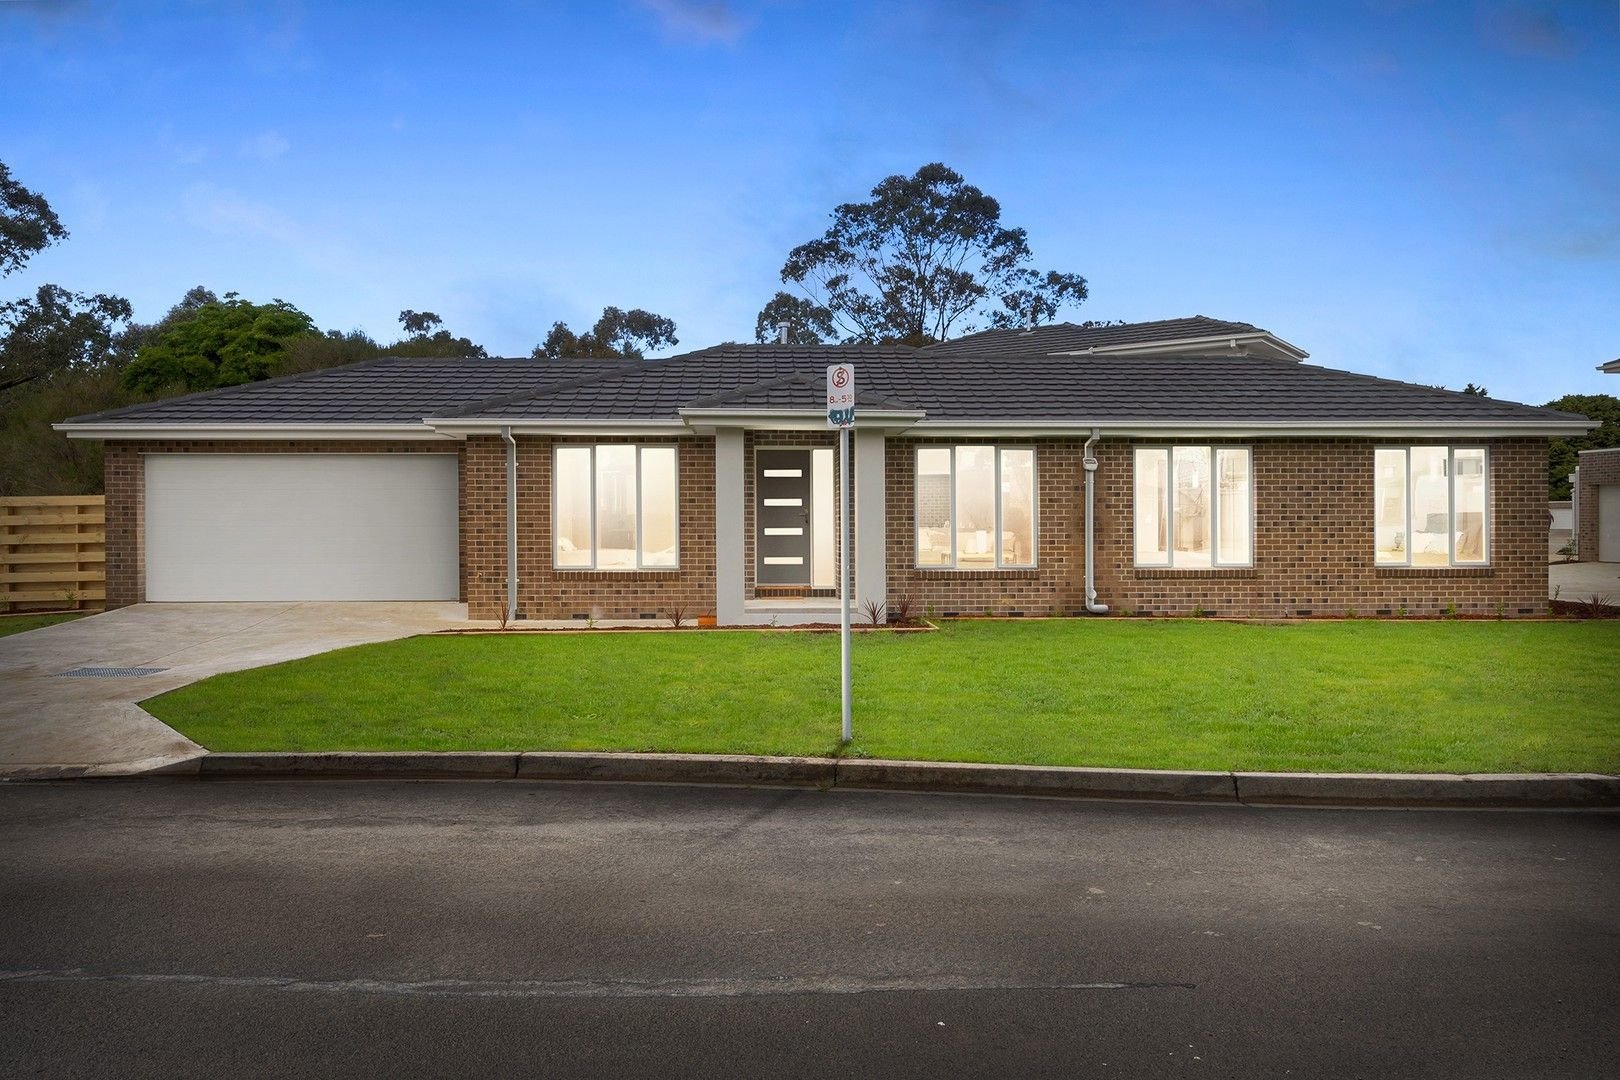 Croydon - Vinter Avenue - 52-62 Vinter Avenue, Croydon, VIC 3136 - Townly - 17.jpg